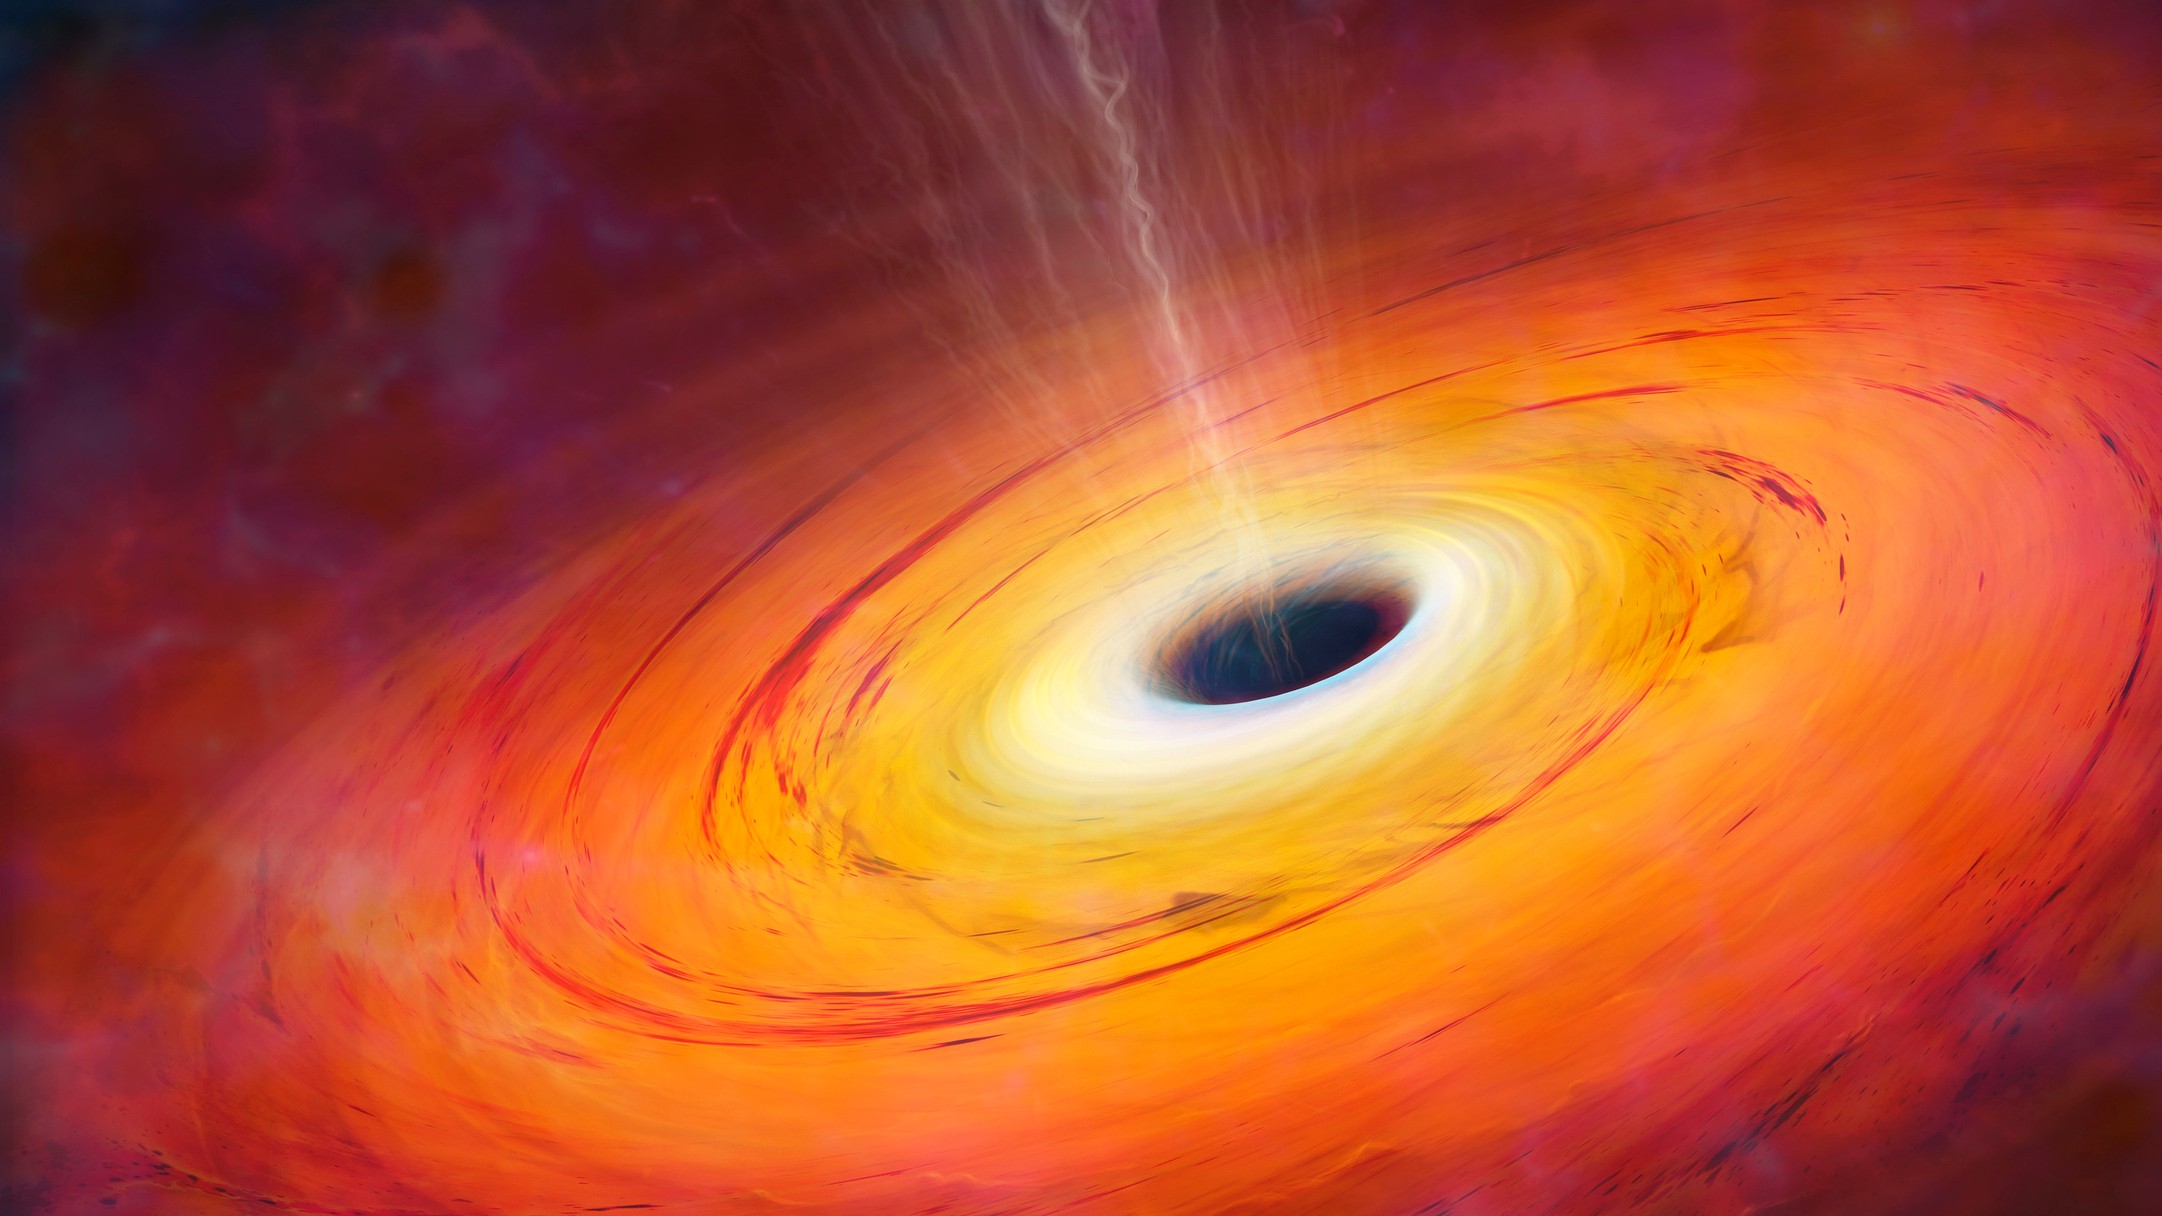 10 Deep Lessons From Our First Image Of A Black Hole's Event Horizon